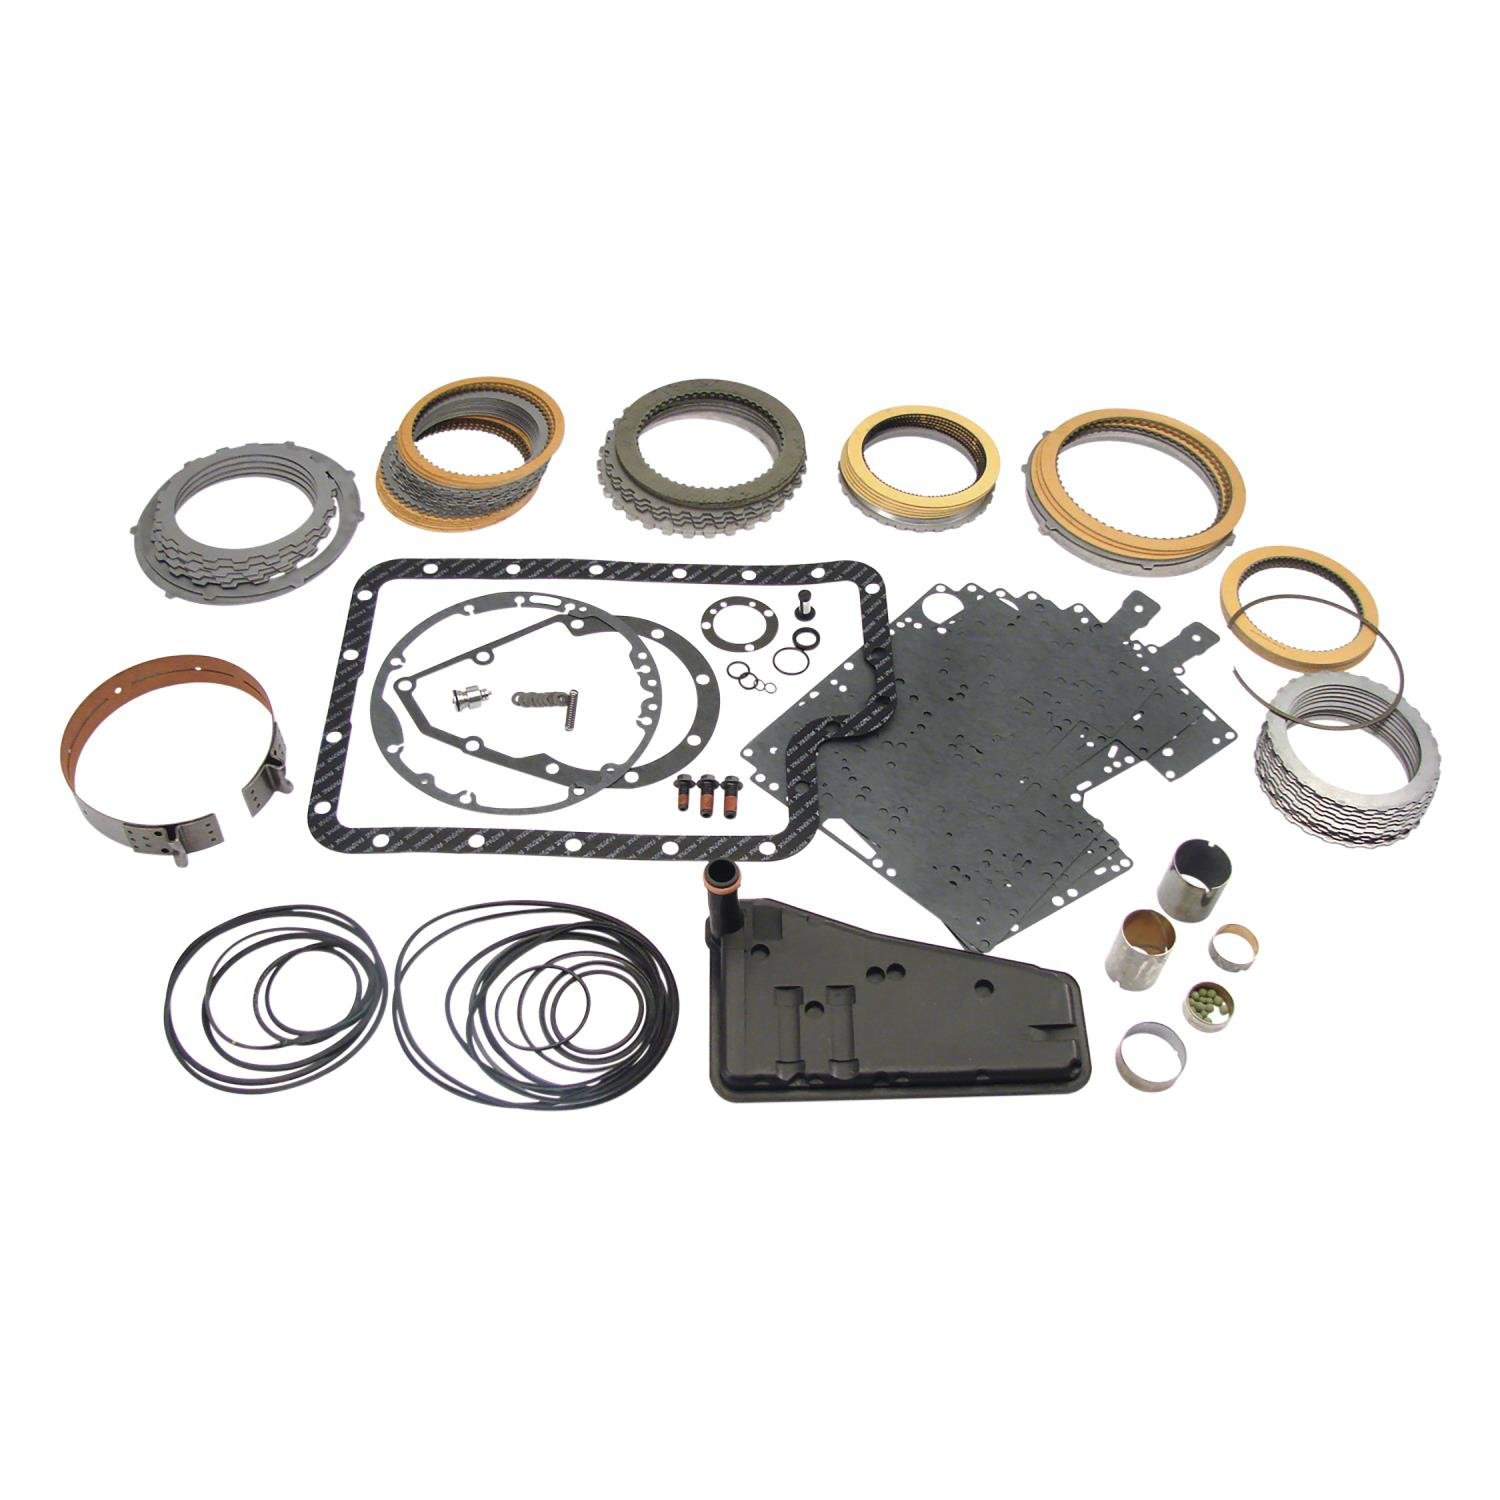 Transmission Master Racing Overhaul Kit 1997-98 Ford E40D/4R100 2WD